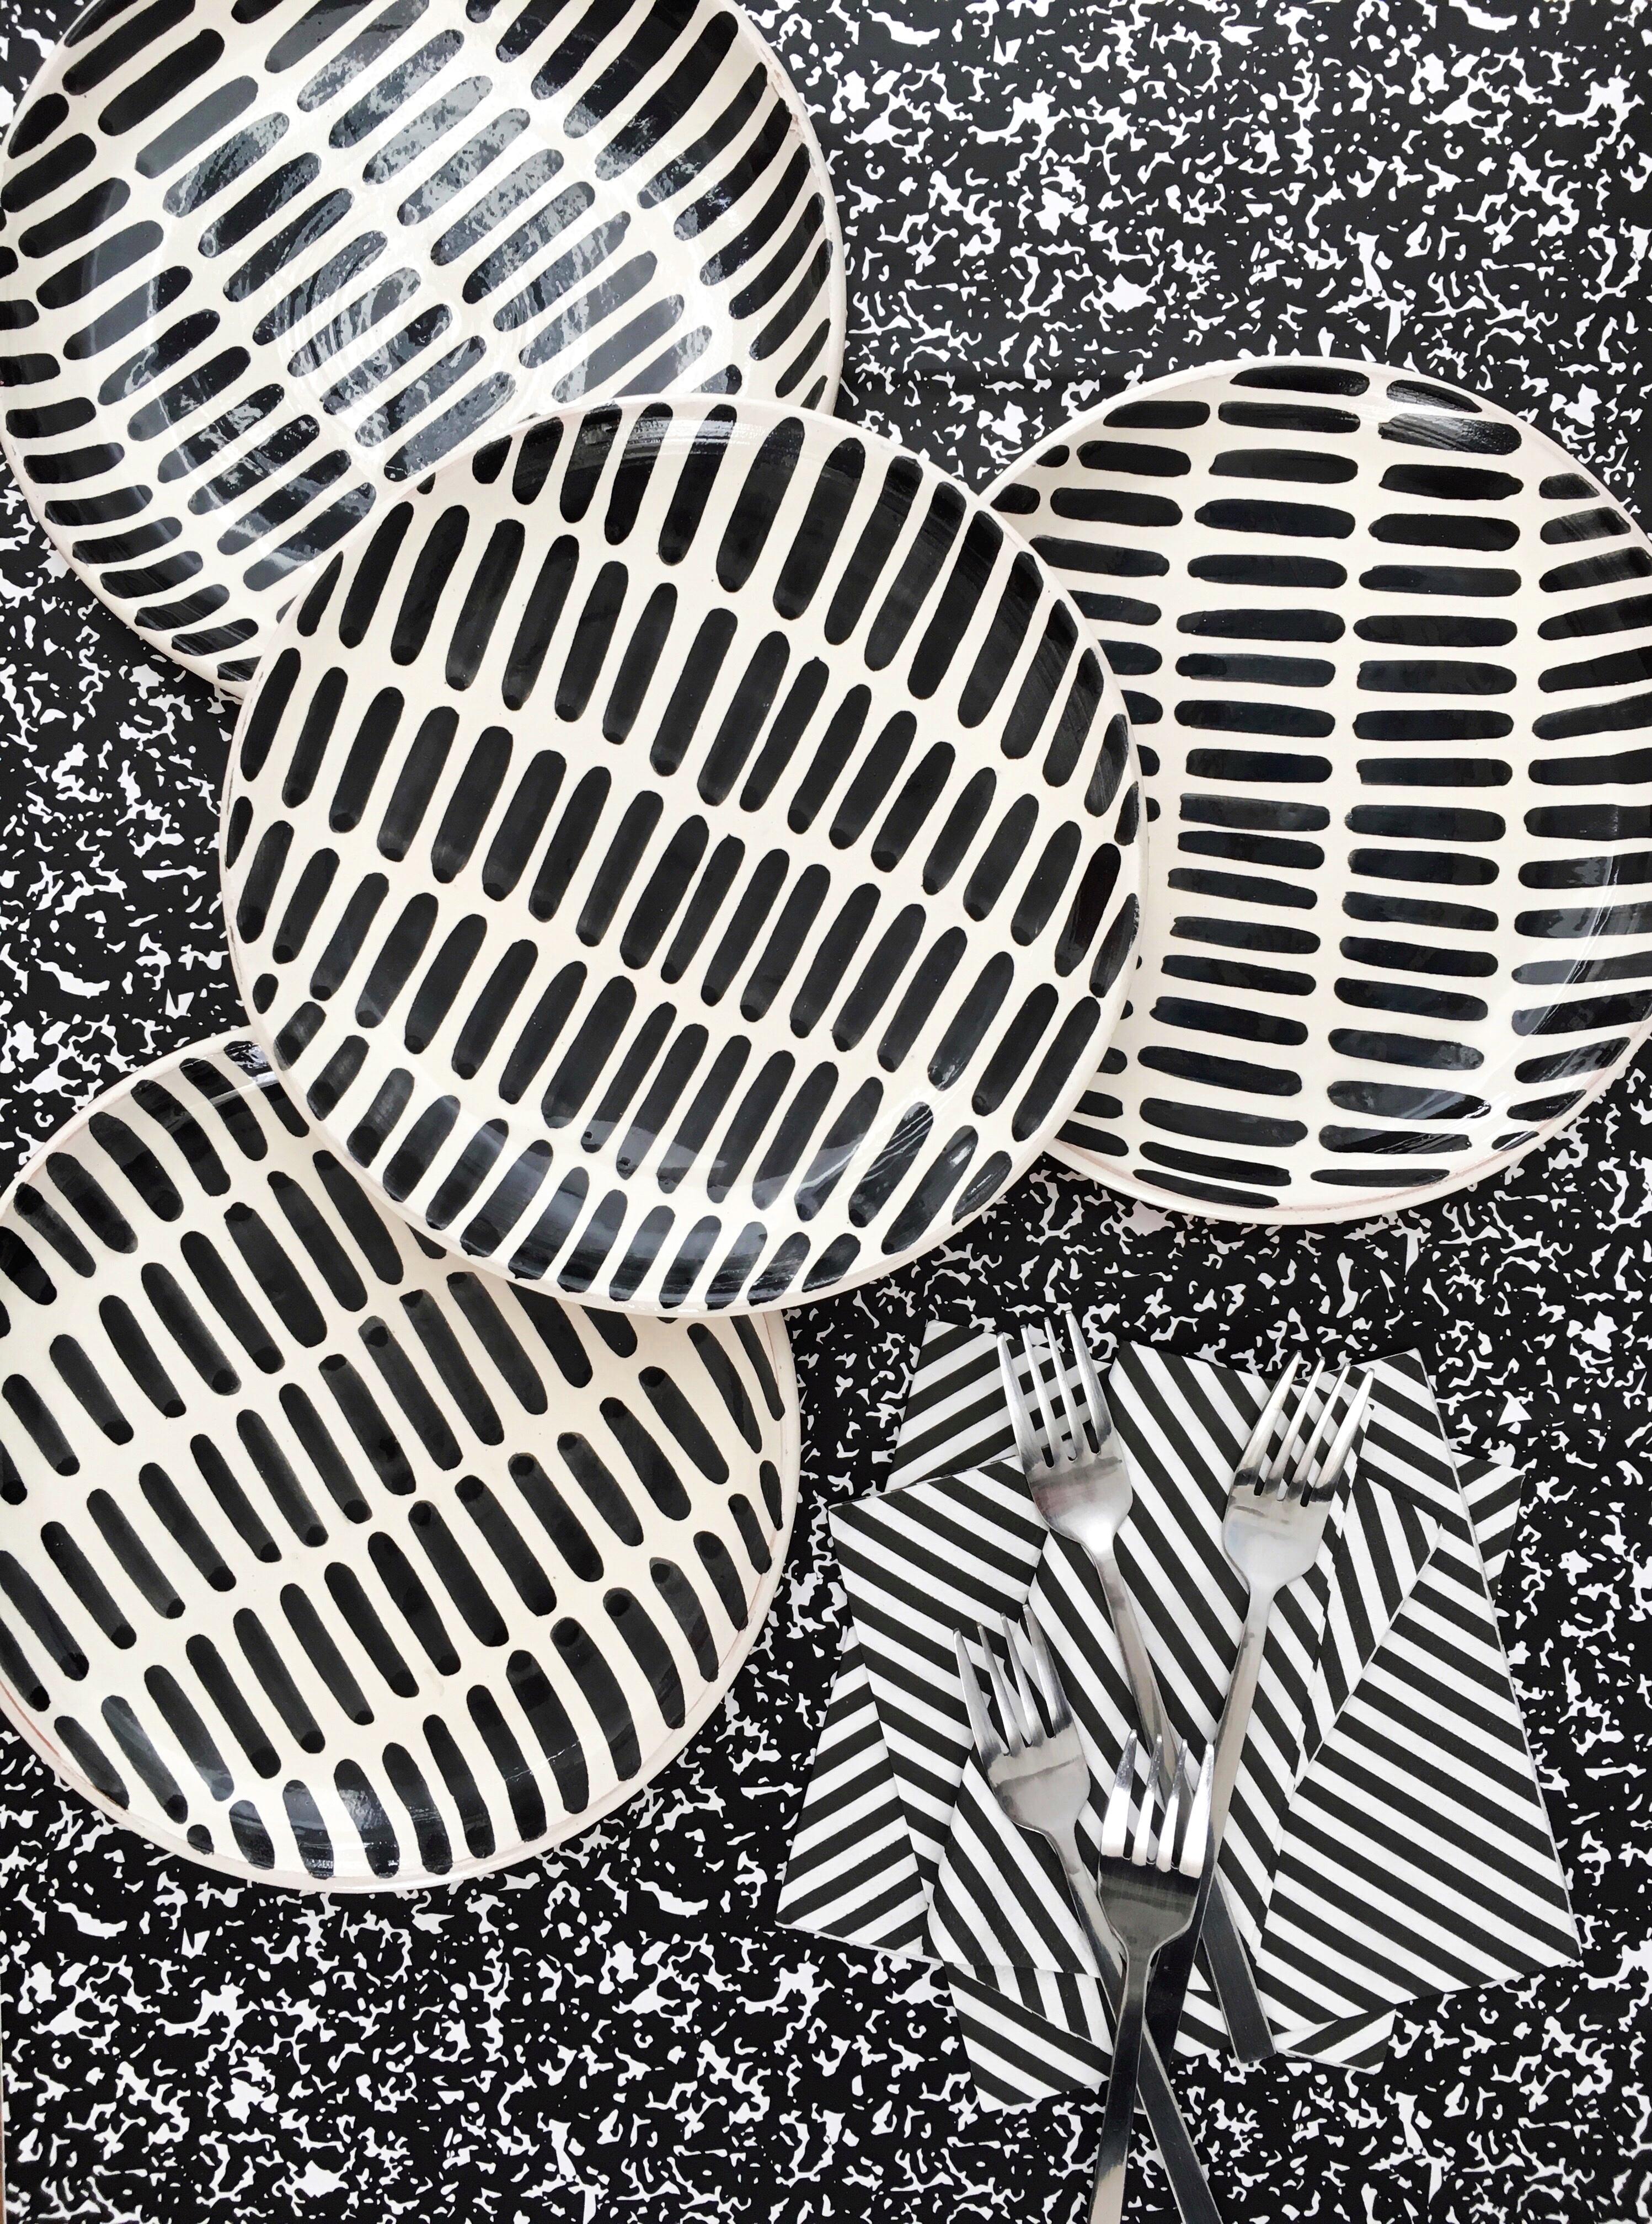 Handmade and hand-painted ceramics from one of the mother countries, Portugal, these beautiful pieces for your table will add a modern and graphic touch and are perfect to mix and match. These patterned plates are available in two sizes:

Salad